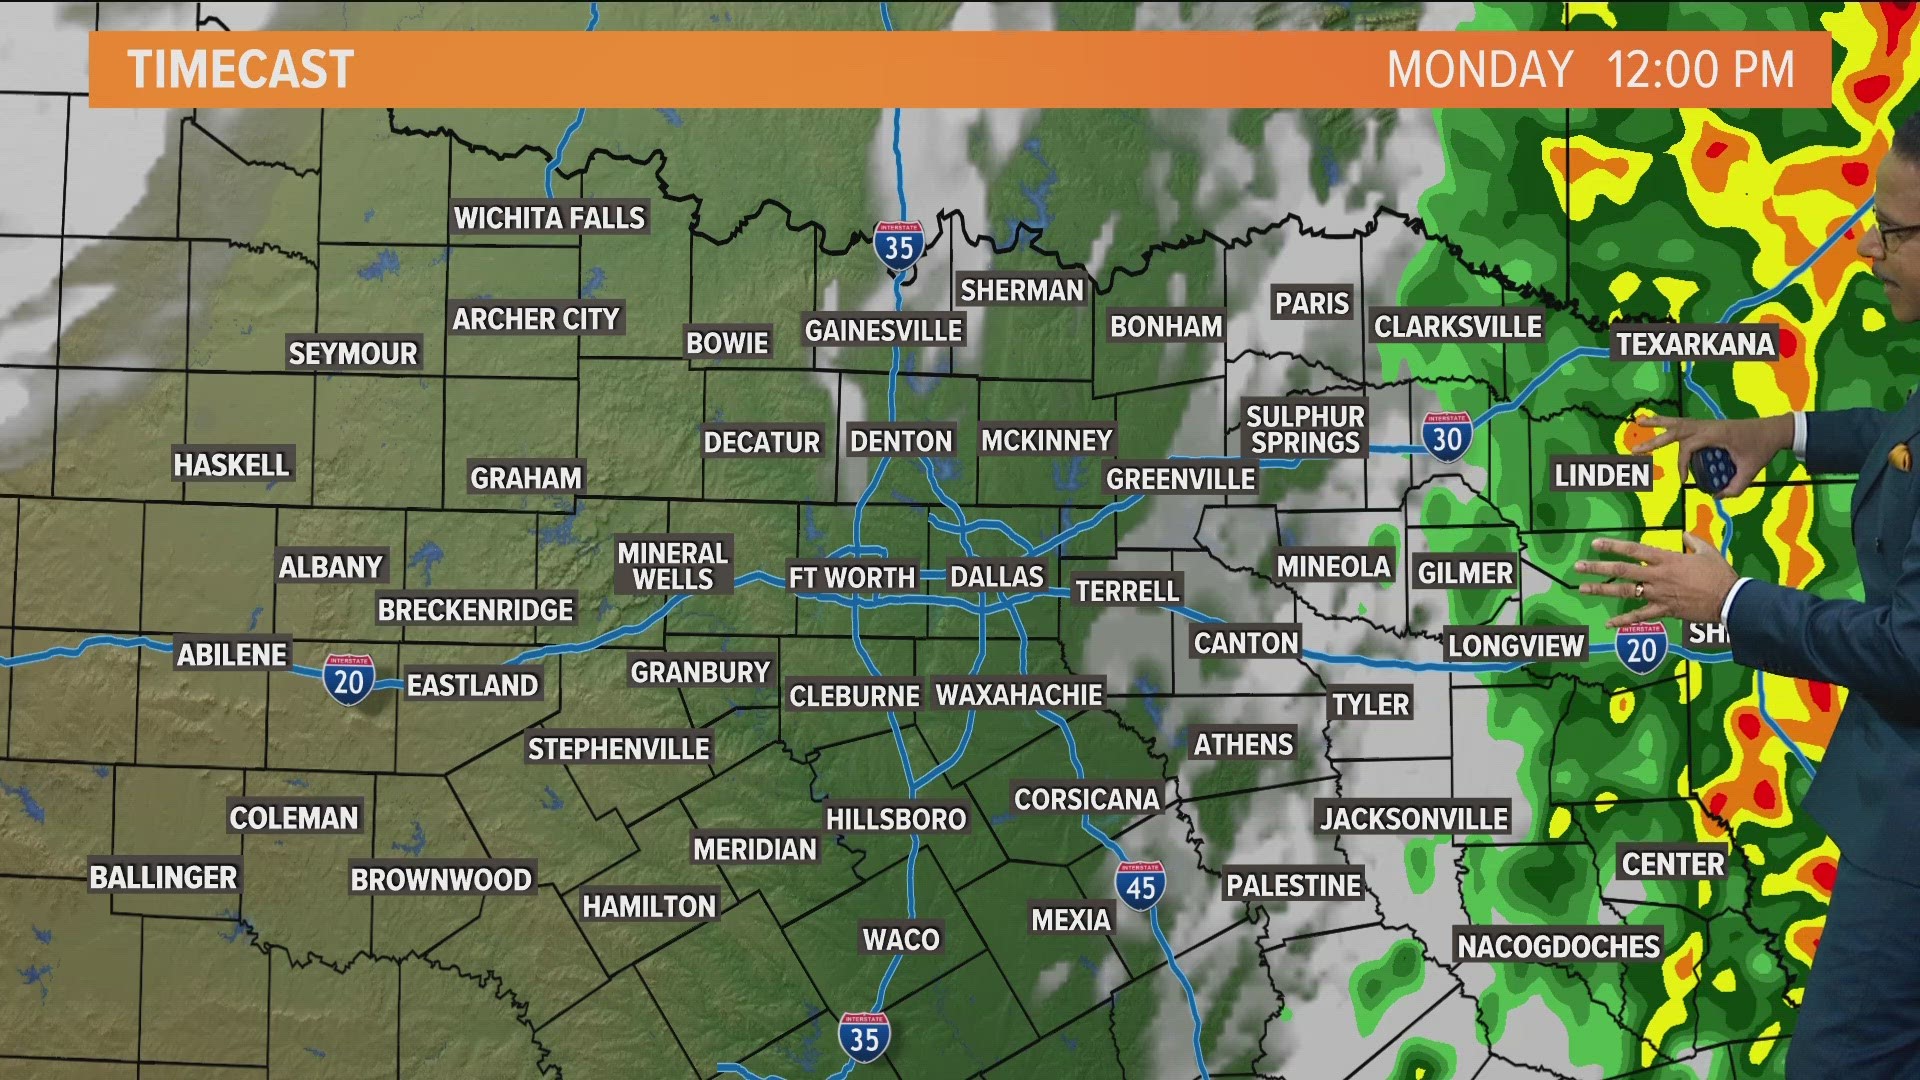 Greg Fields has the latest rain forecast for Monday morning as storms are clearing out of North Texas.